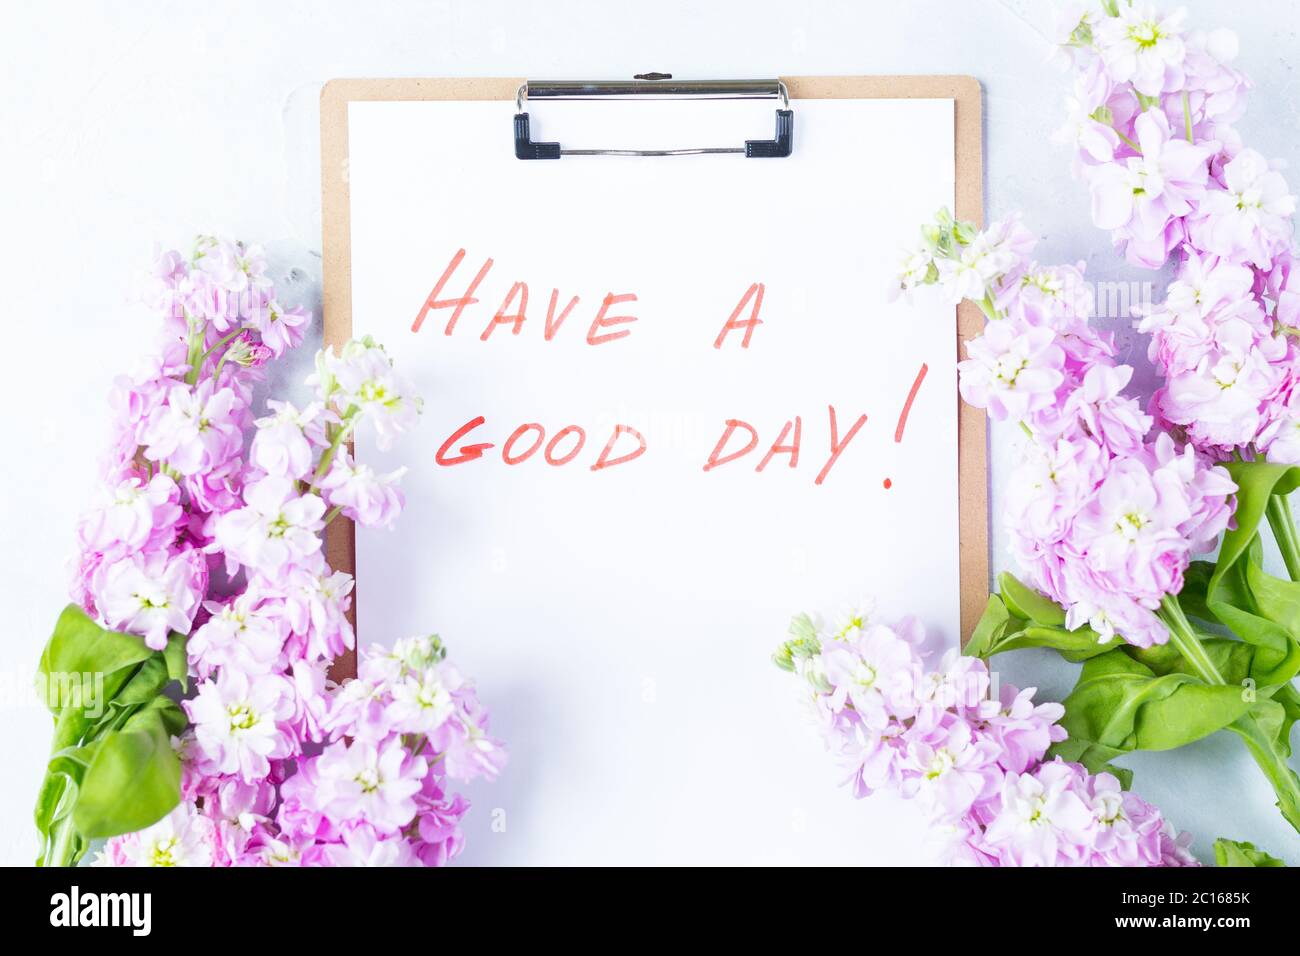 Light white Desk top view. Phrase words Have A Good Day. Purple flowers and lap top top view, flat lay. Good morning.  Stock Photo